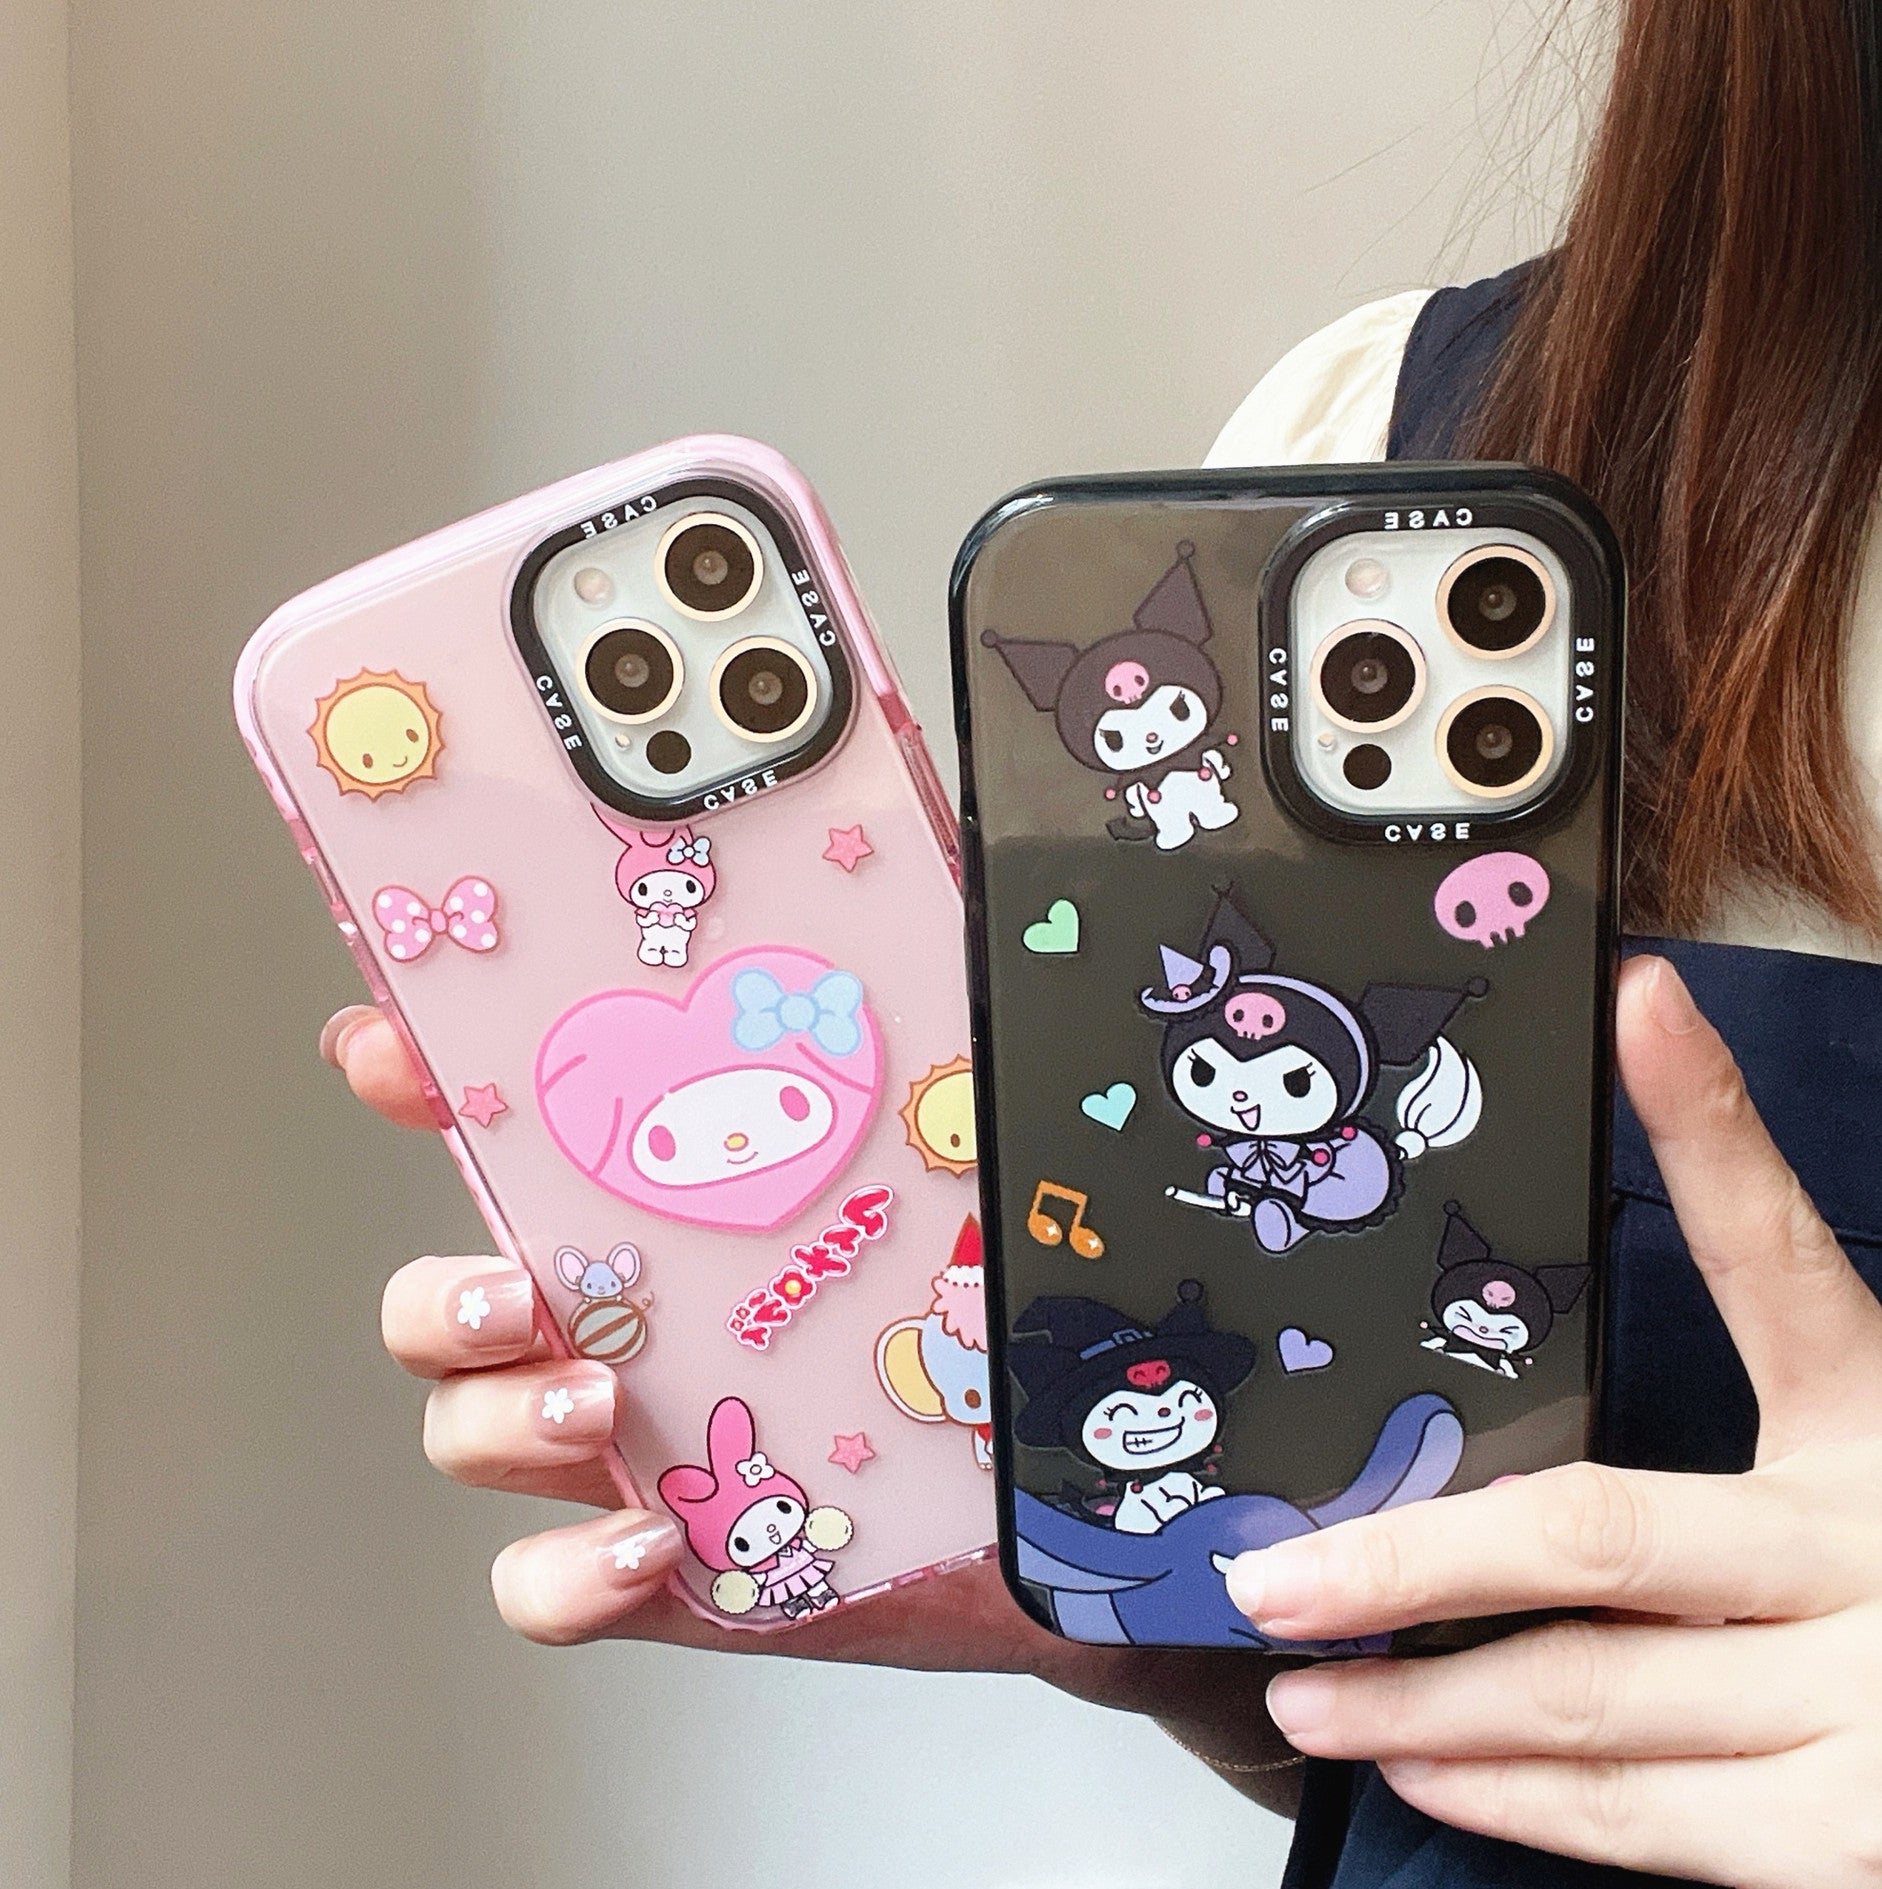 Kawaii Japanese Anime Sailor Moon Phone Case For iPhone 11 Pro Max Xr Xs  Max X 7 7PLus 8 Plus Cases Soft Silicone Back Cover - Price history &  Review | AliExpress